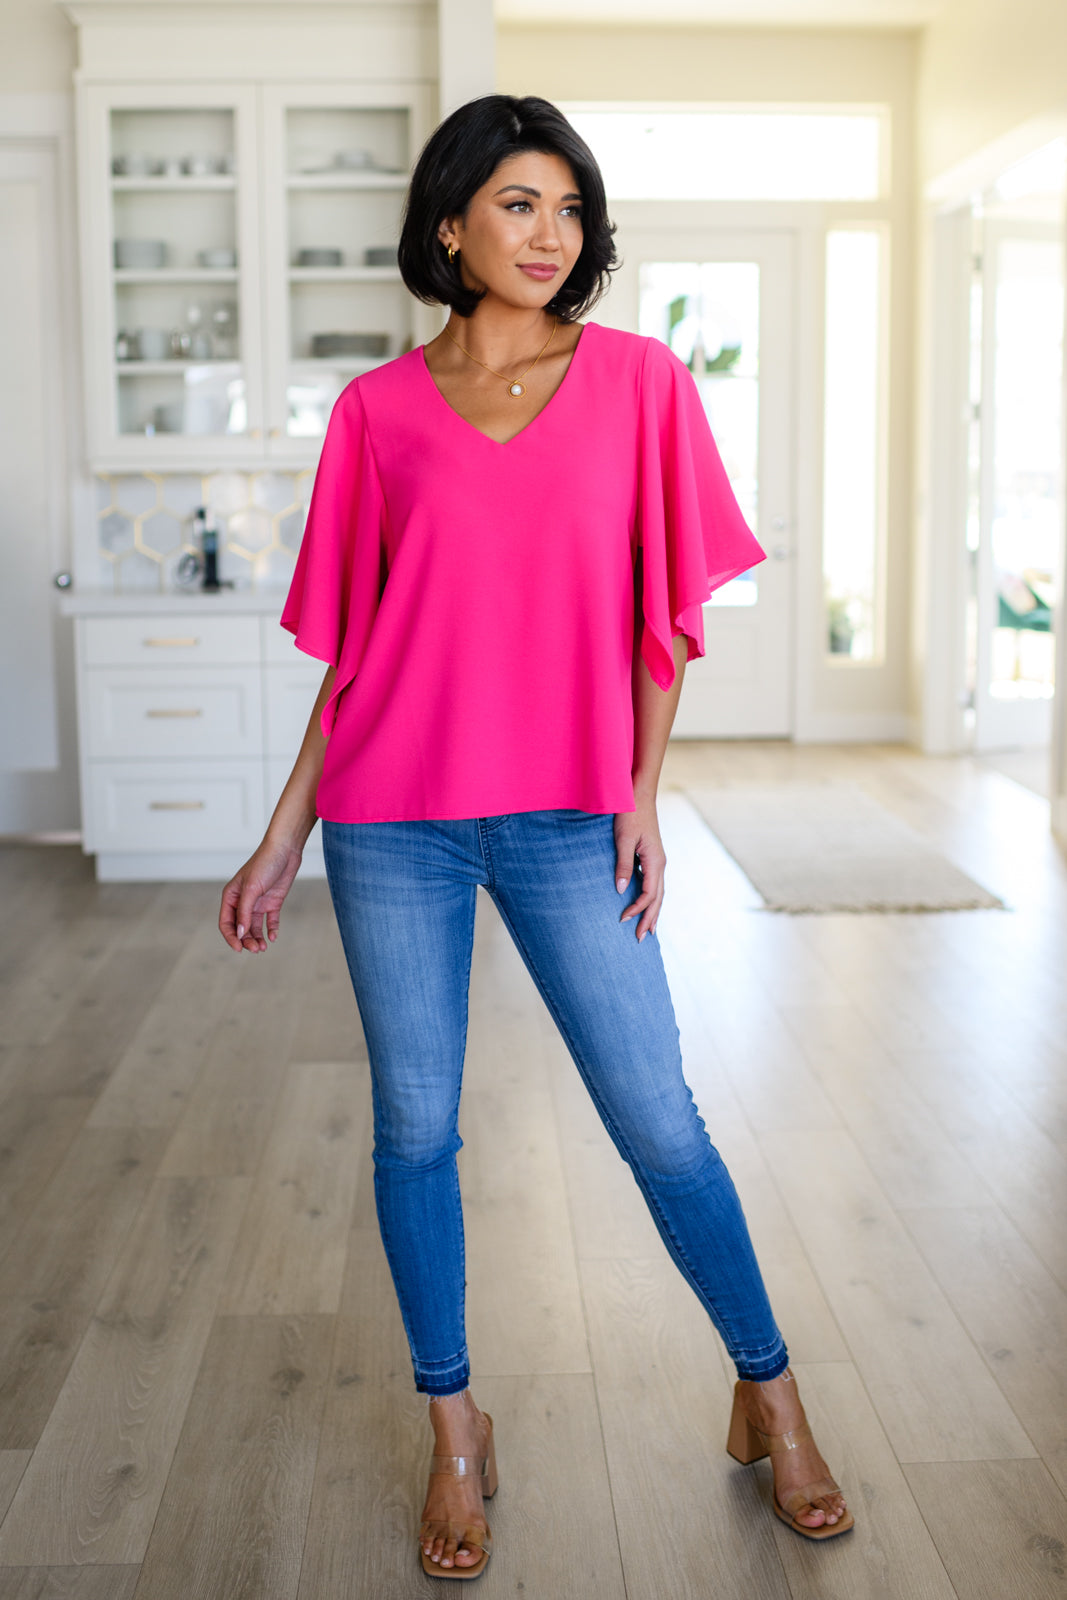 Latest Crush Pink V Neck Top, SMALL left!